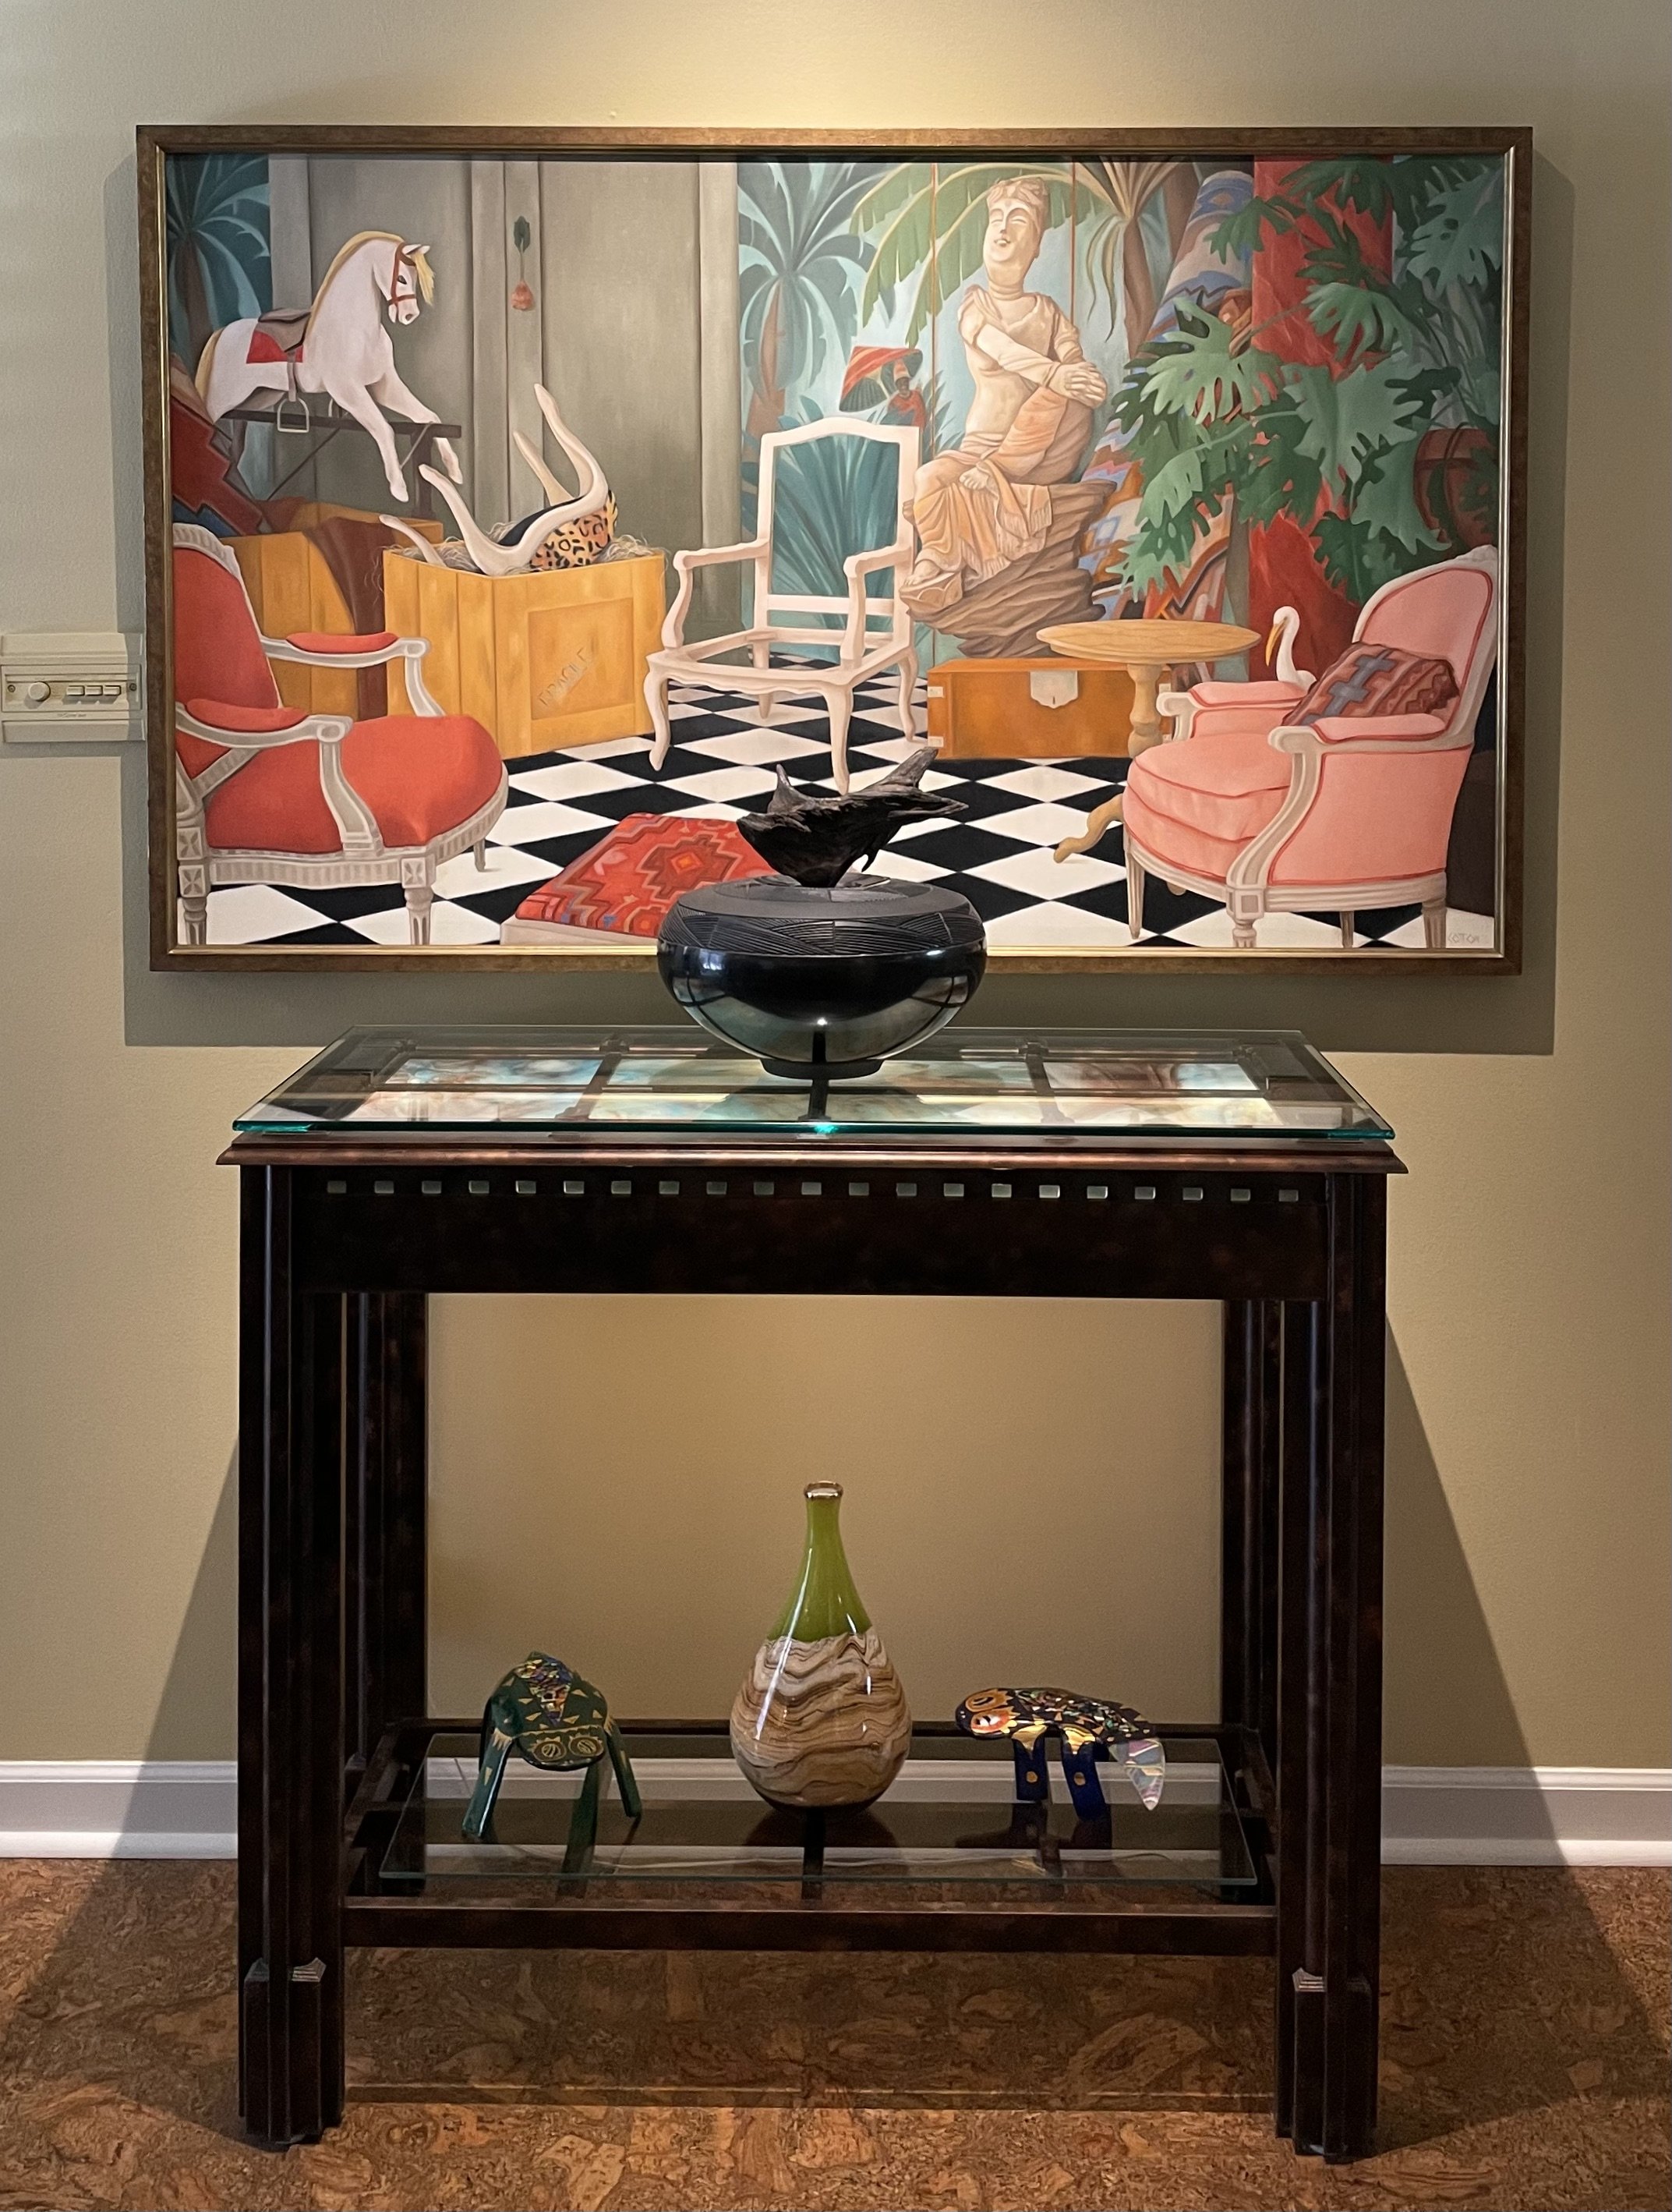    Antique Shop  , 36” x 60”, oil on canvas, Sheila Cotton;   Black on Black Pot   with driftwood top (on table),  Winston Taylor  